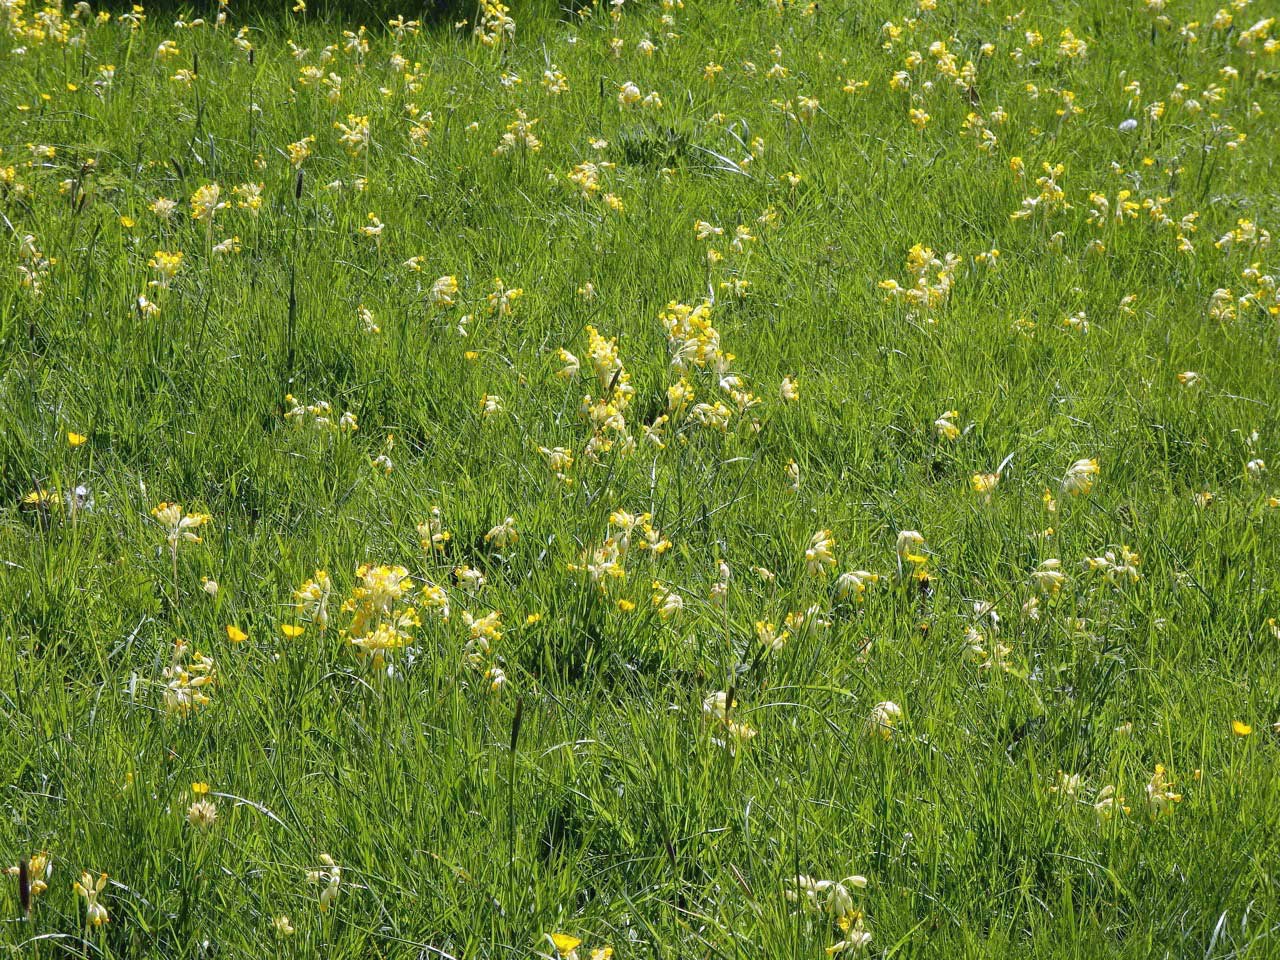 Drifts of cowslips